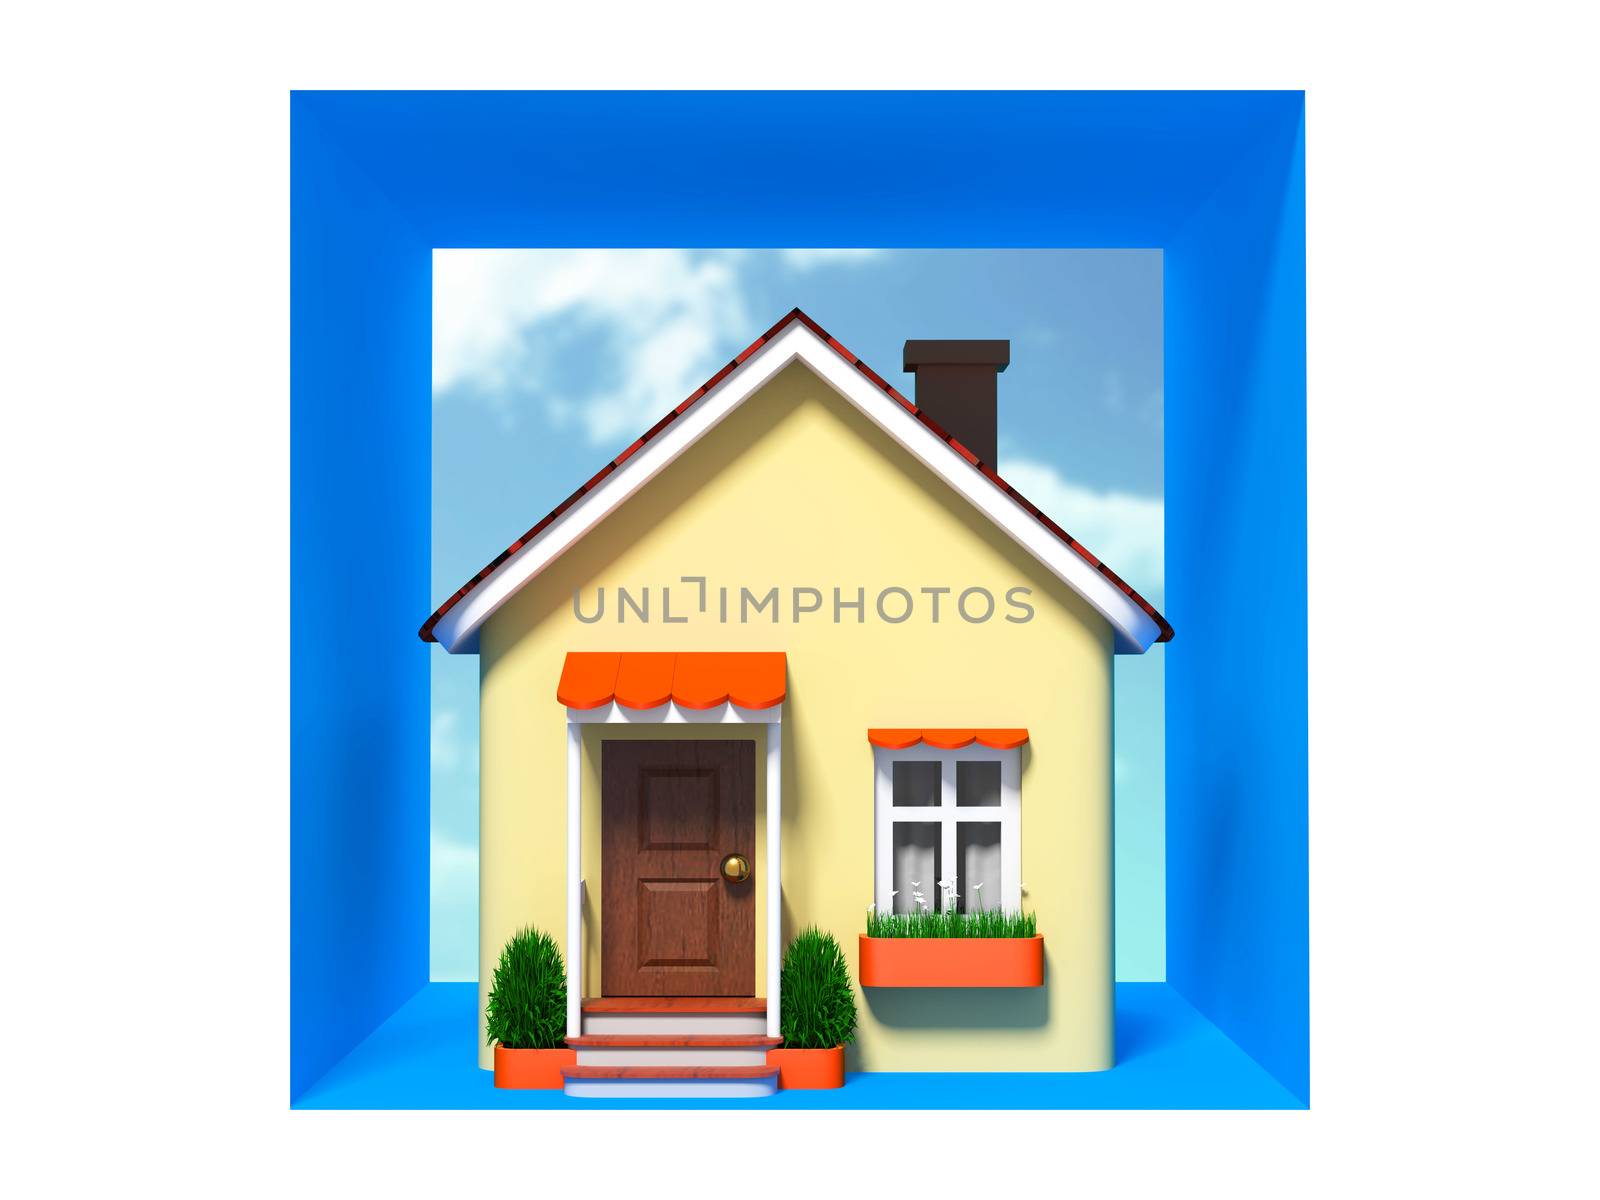 Toy house on sky background in the square by Lixell